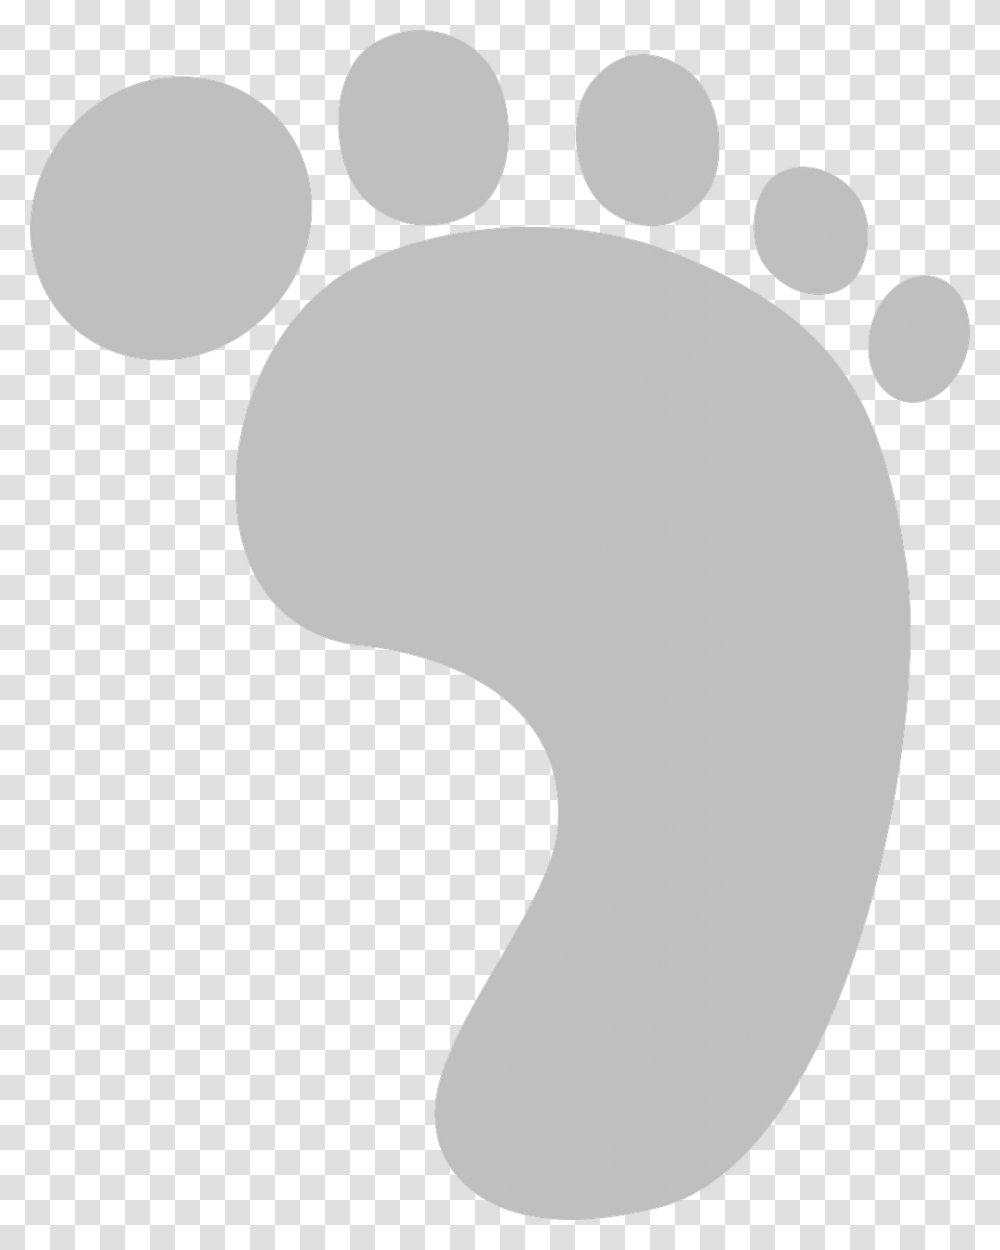 Baby Footprint Clipart Black And White Baby Footprints Clipart Grey Transparent Png